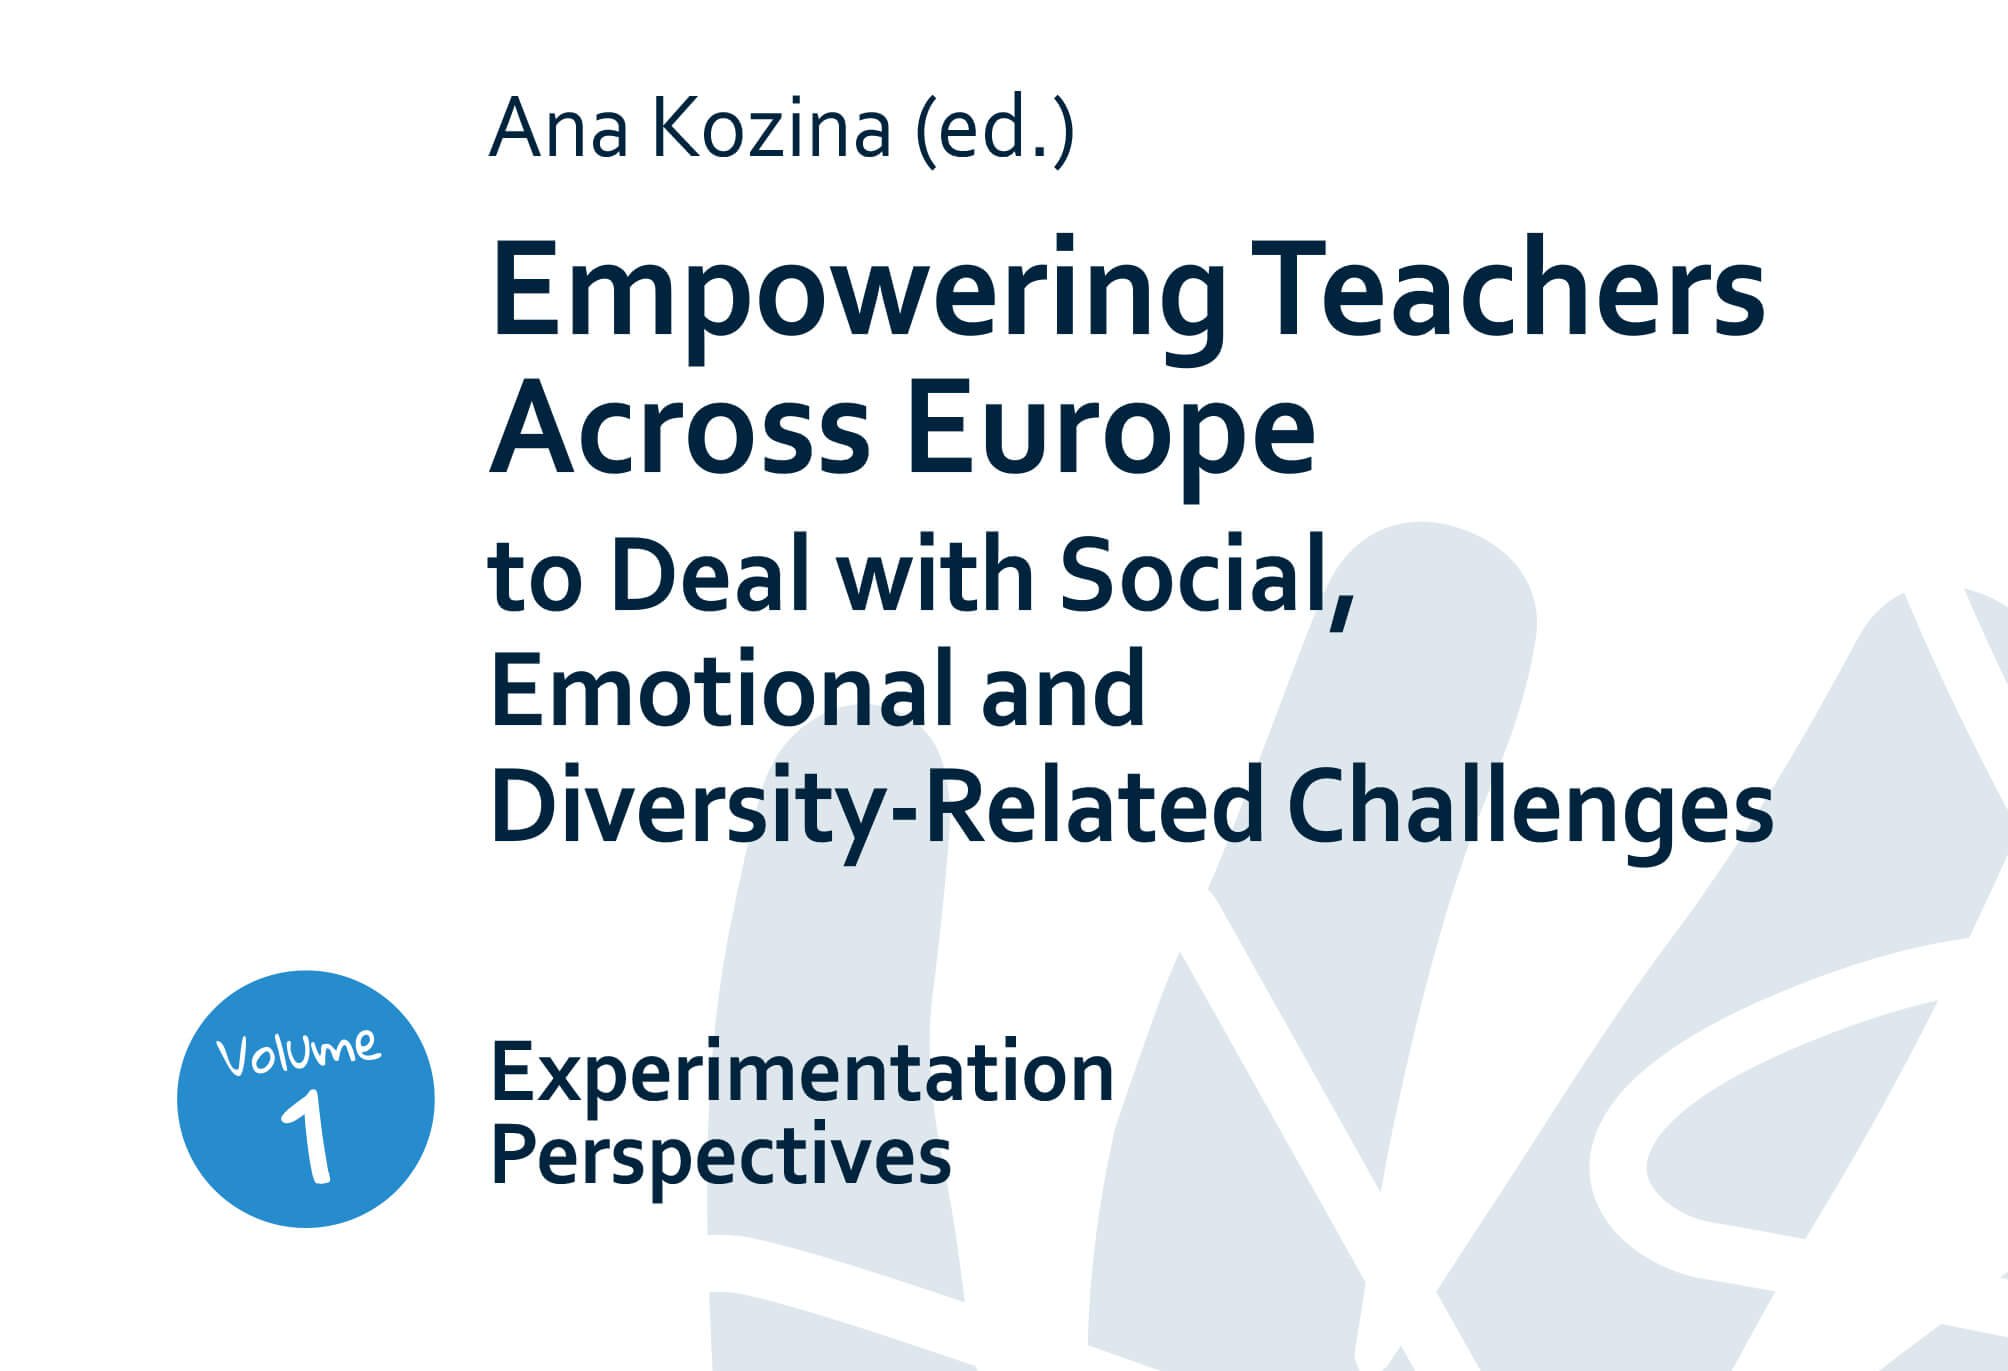 Empowering Educators Across Europe – Experimentation Perspectives